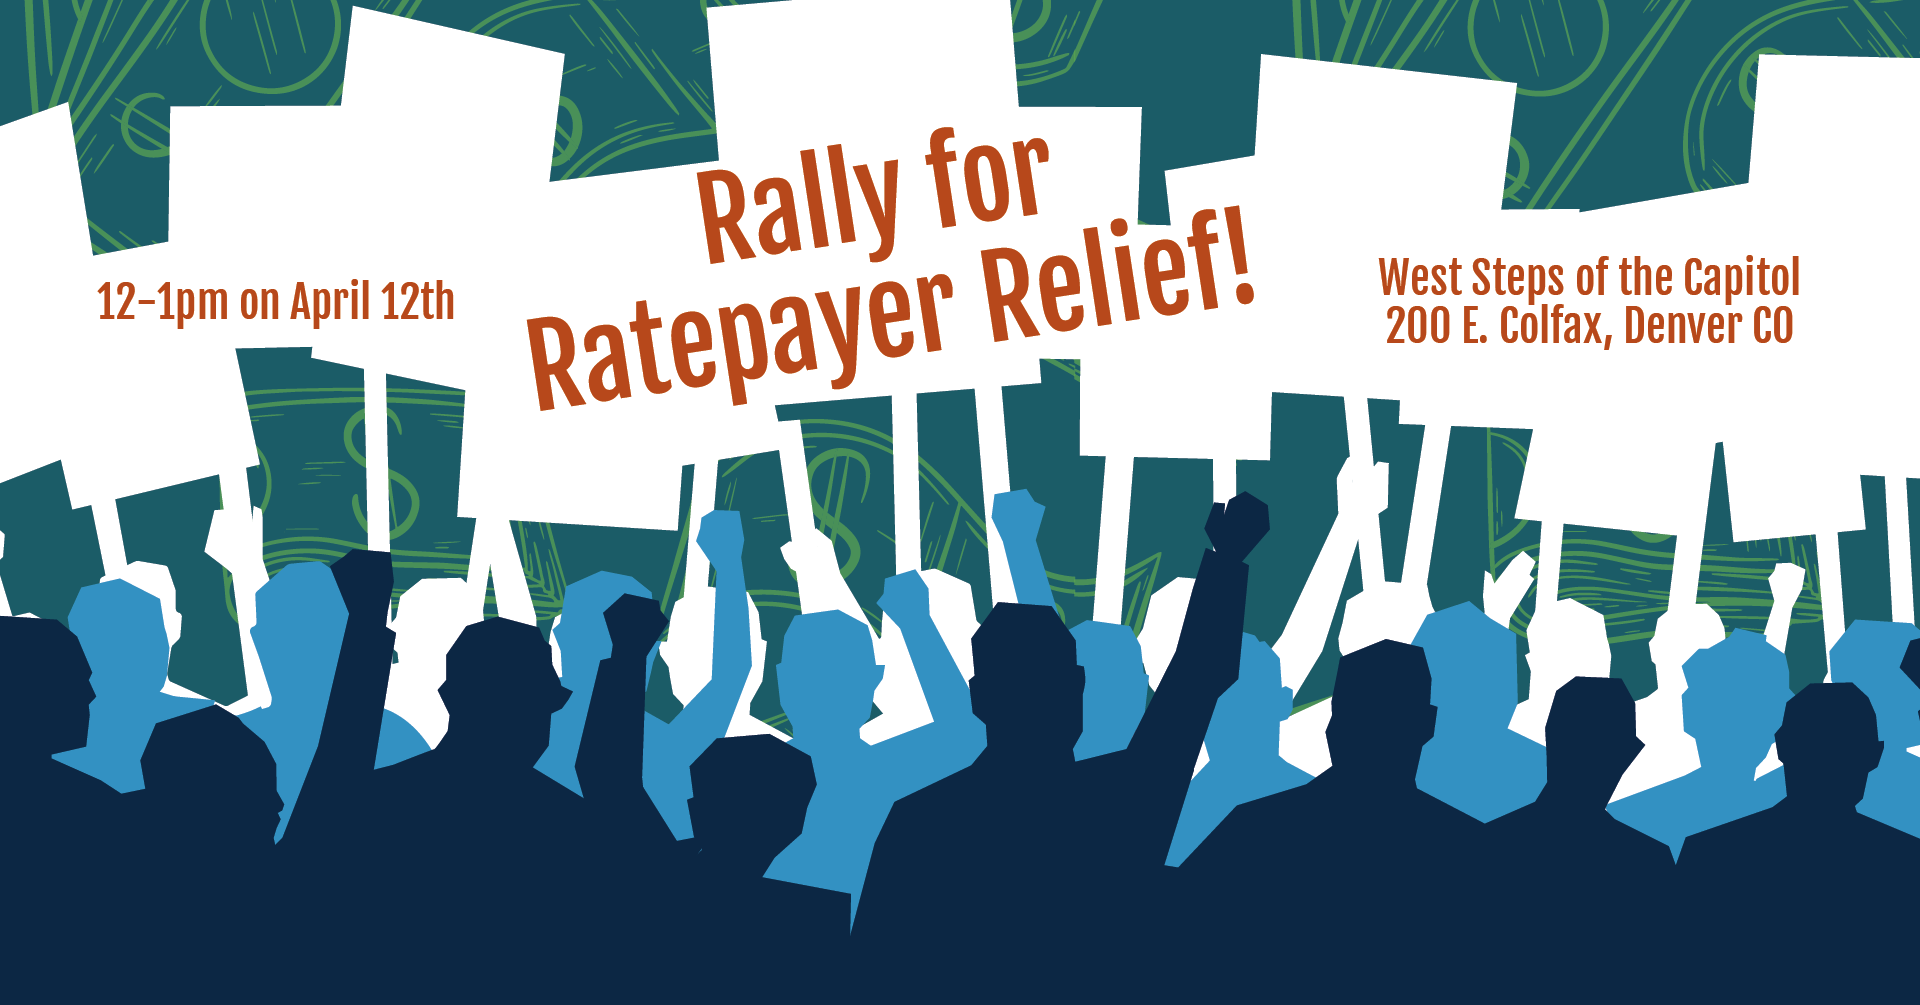 Ratepayer rallye for relief!